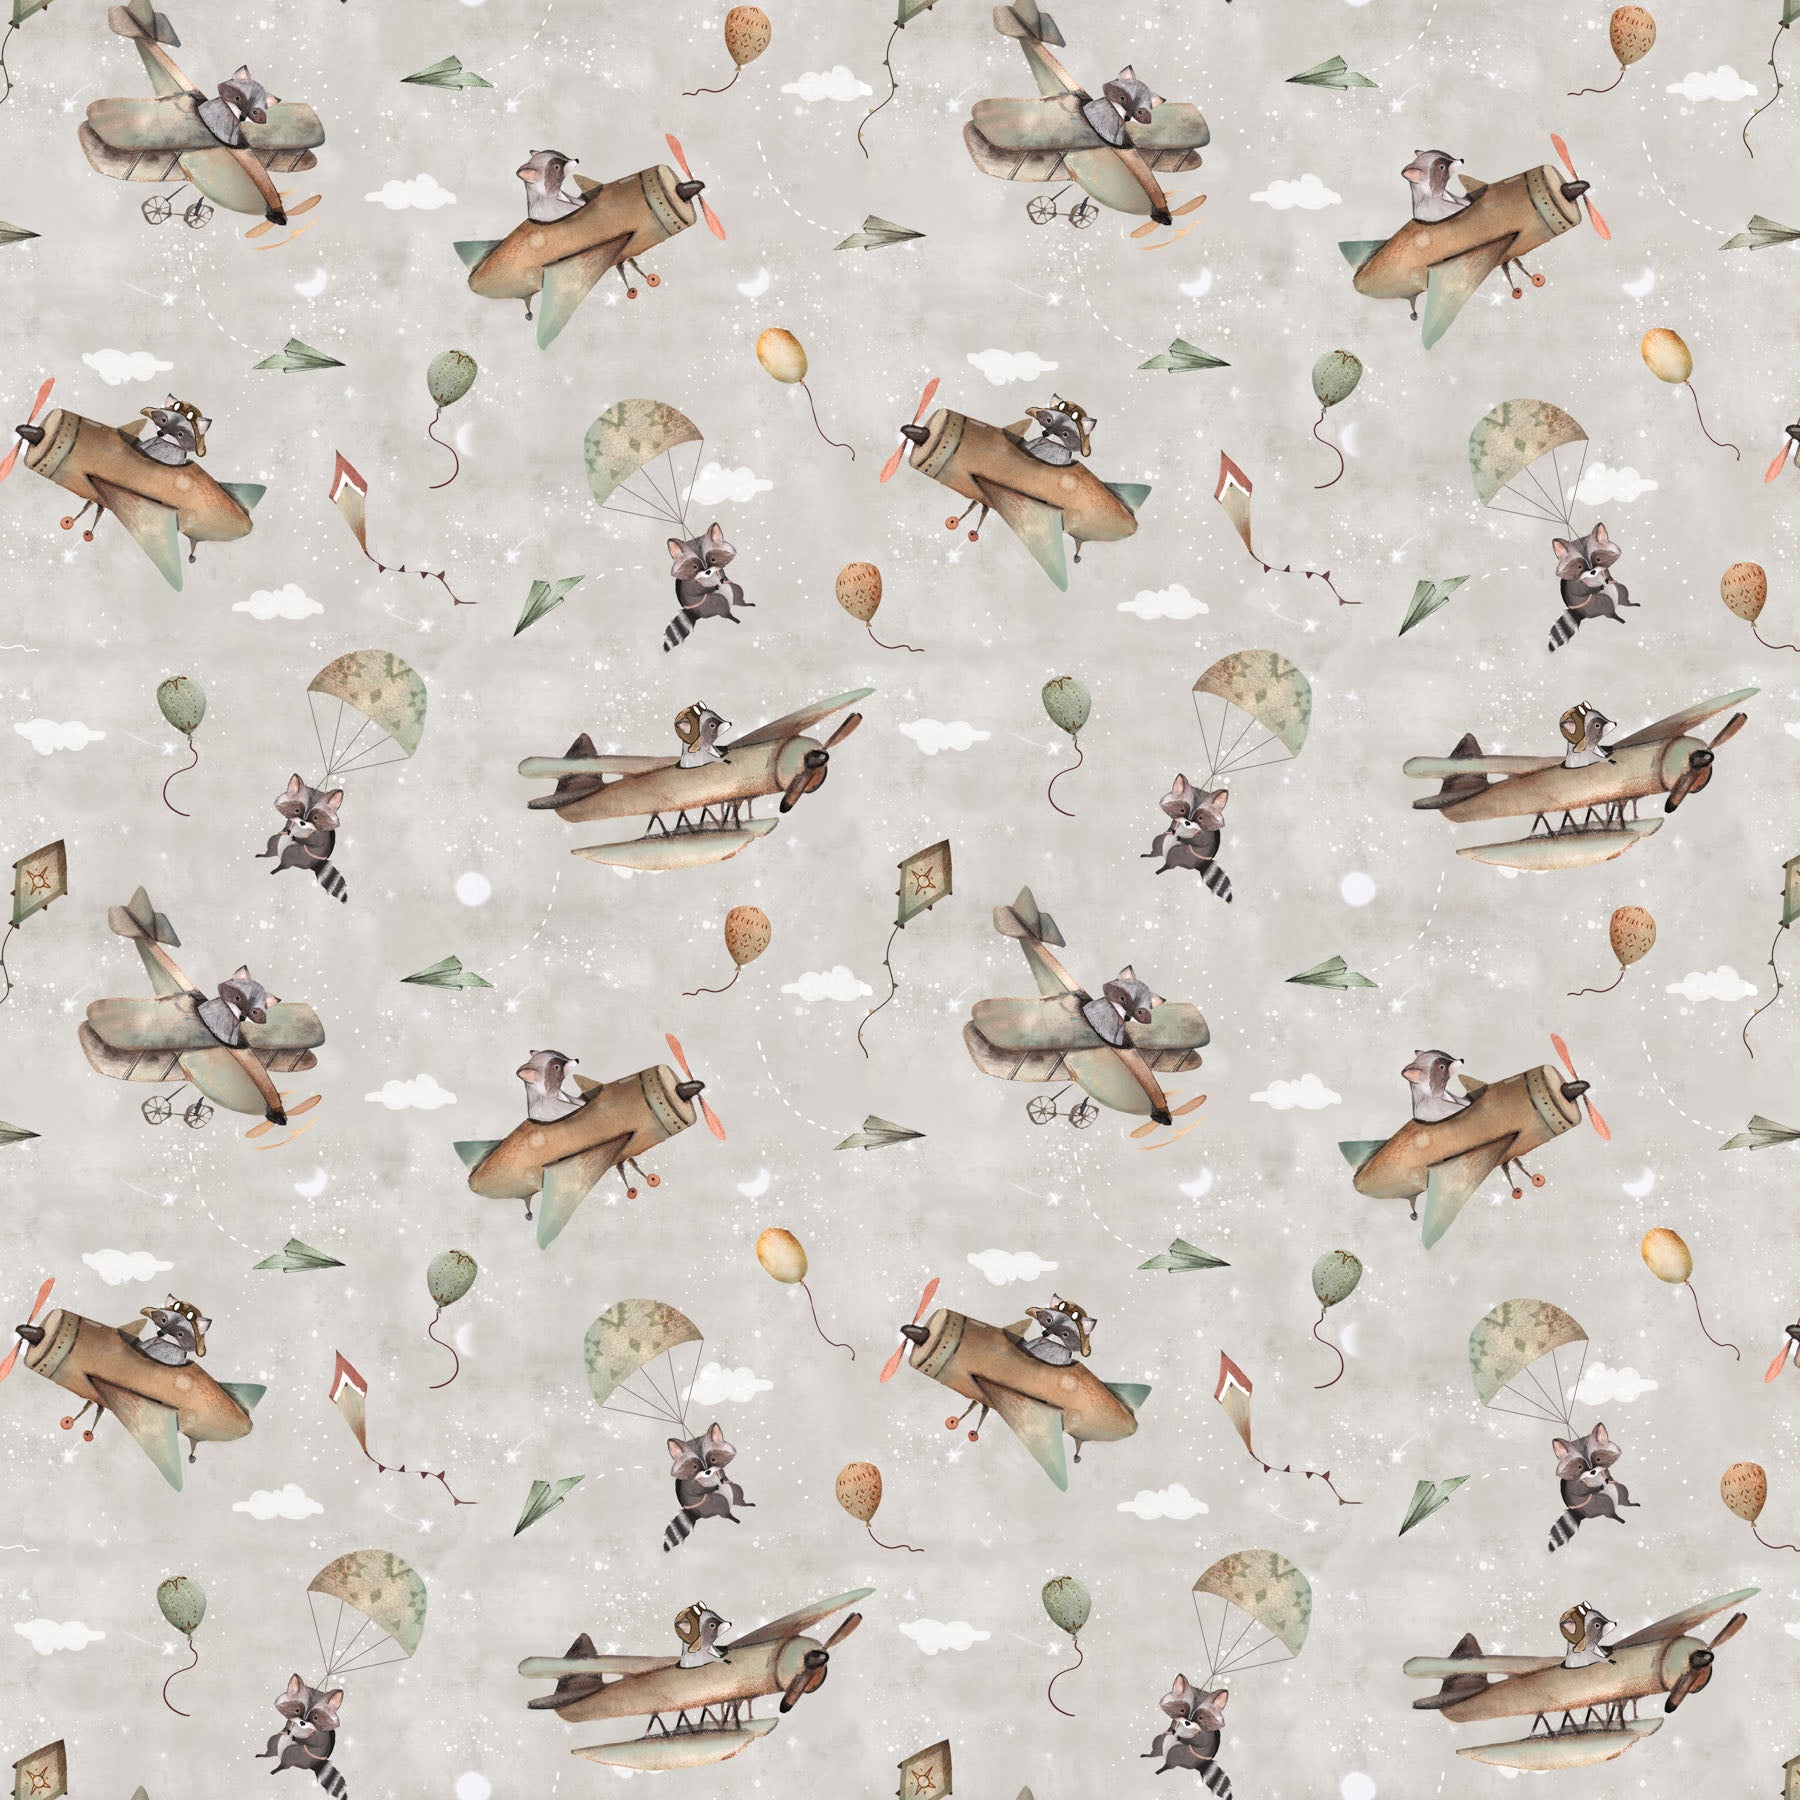 Great Journey Quilt Fabric - Raccoons in Gray - 90829-90